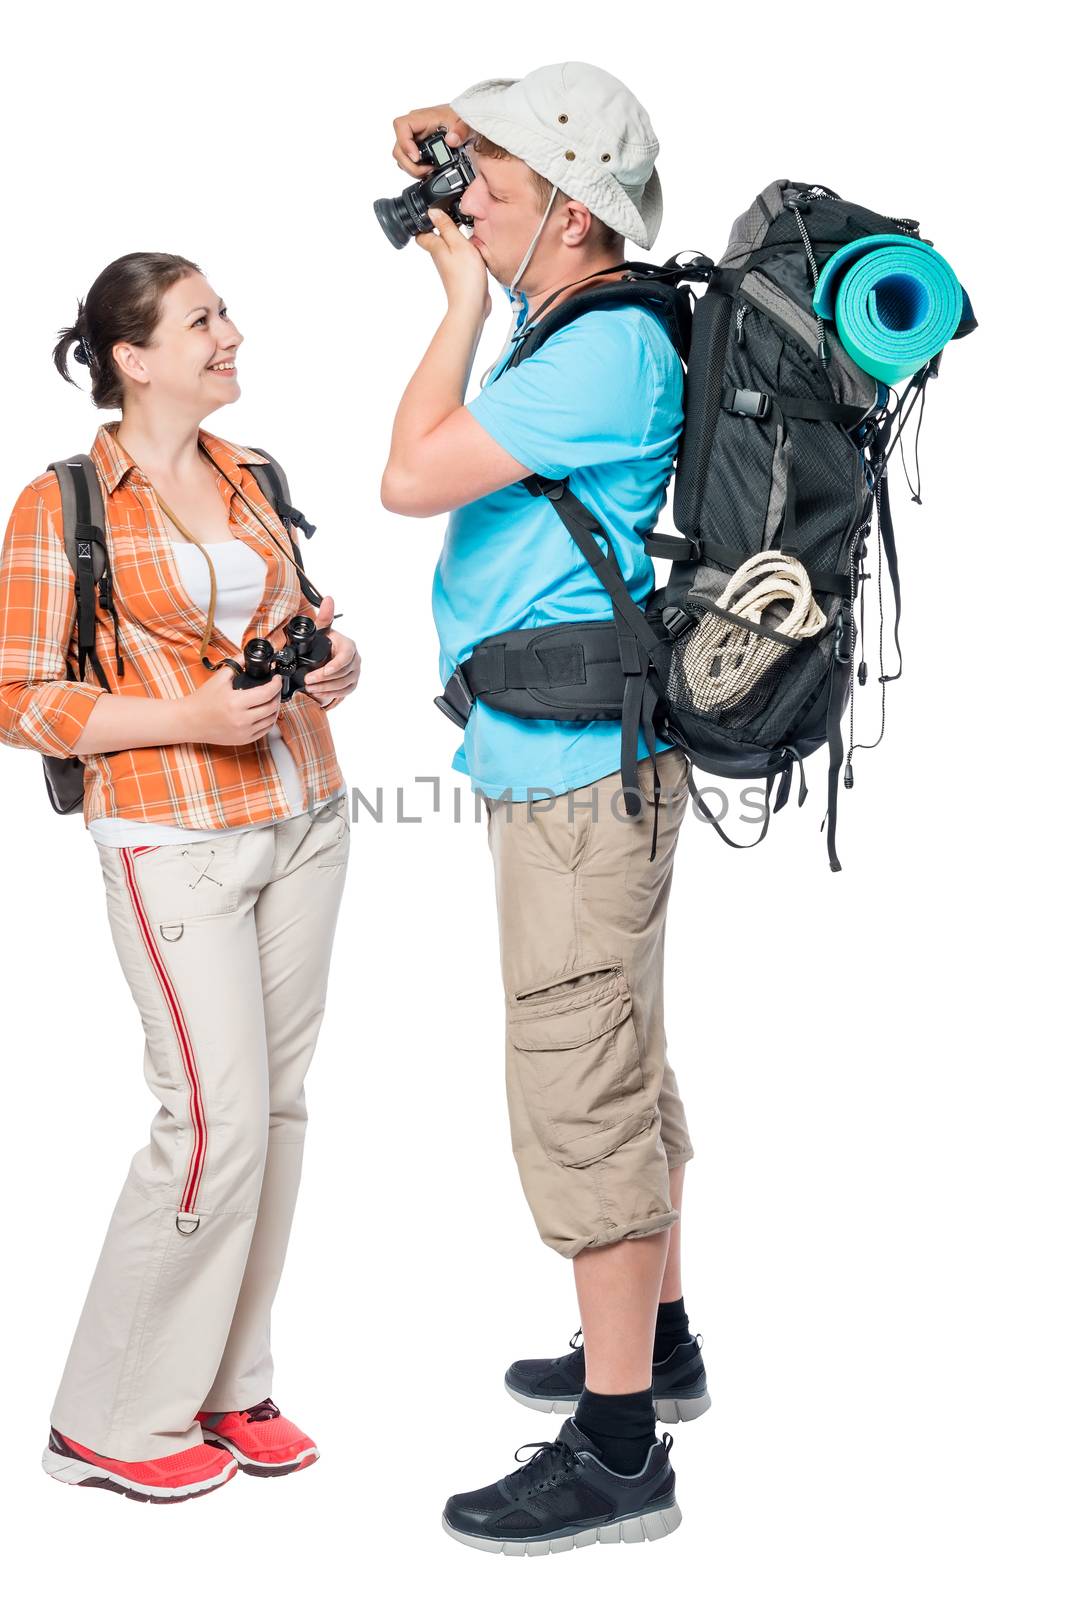 Model and man with camera tourists with backpacks on white backg by kosmsos111